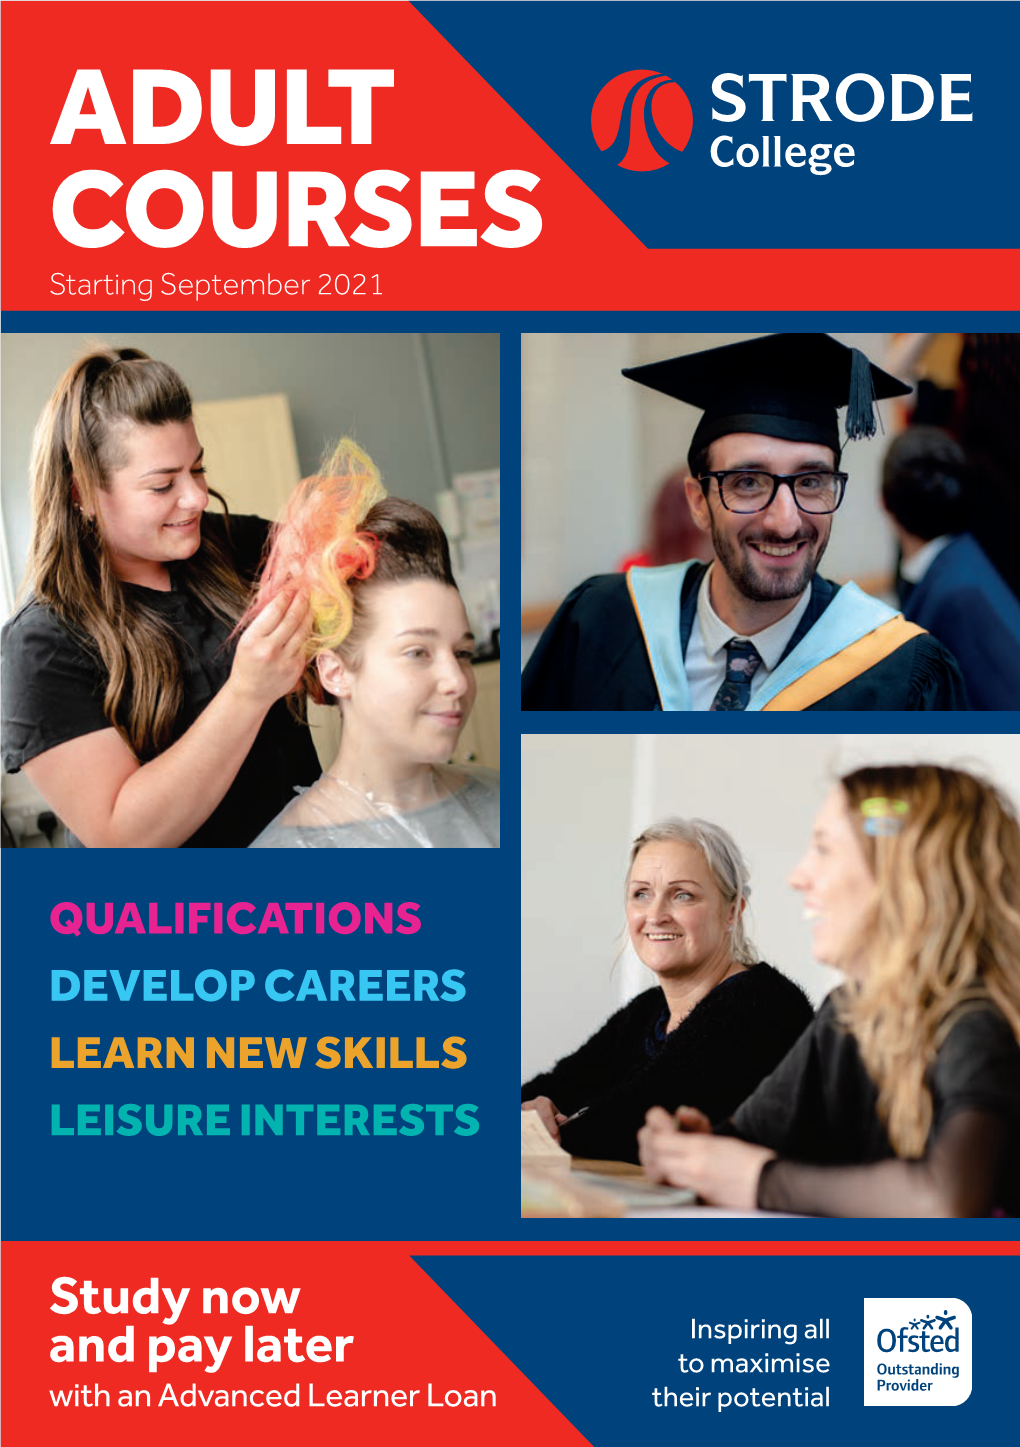 ADULT COURSES Starting September 2021